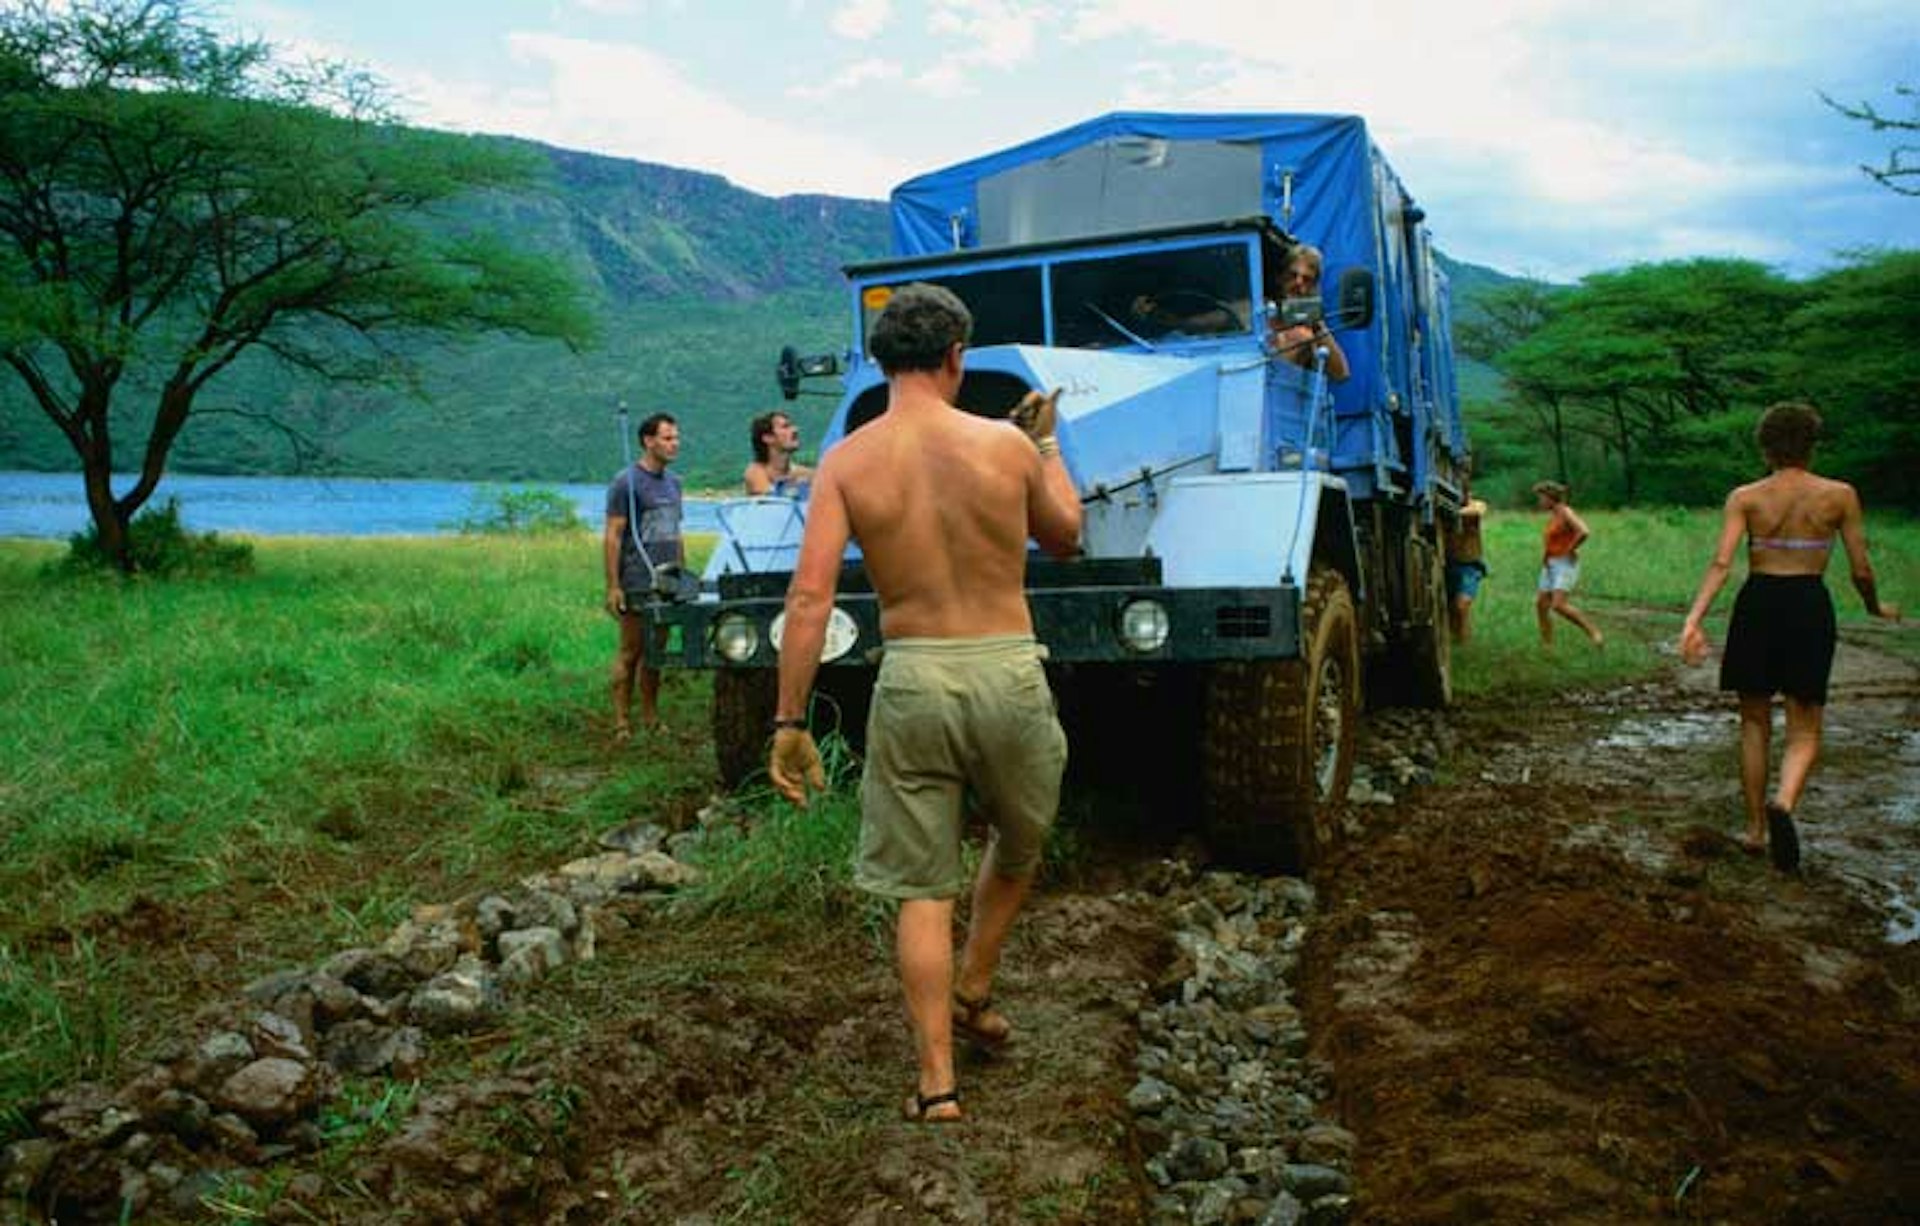 Overland truck stuck in the mud, Kenya. Image by Christer Fredriksson / Lonely Planet Images / Getty Images